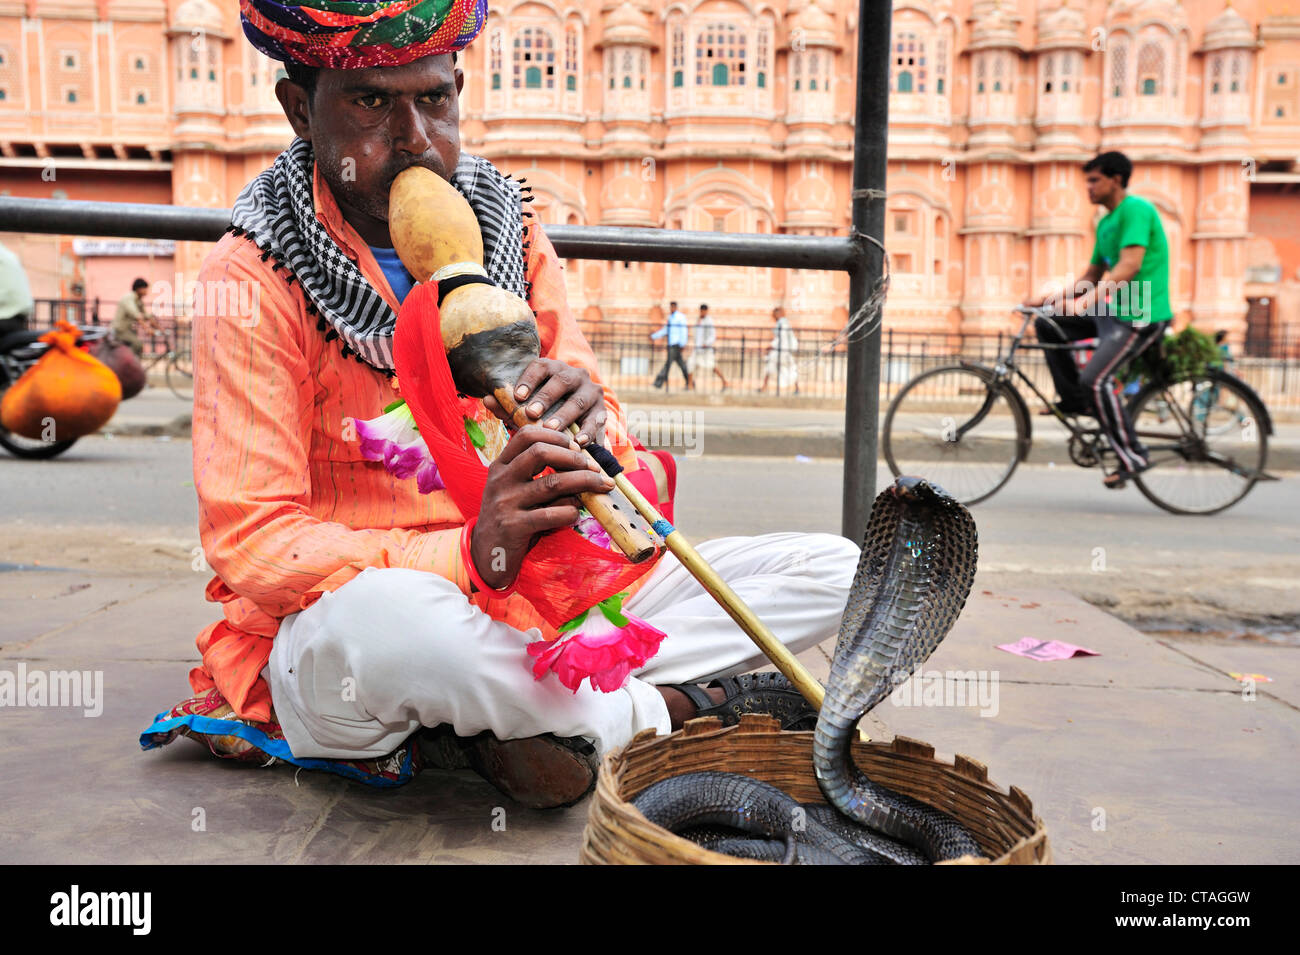 Snake charmer with palace of winds in background, palace of winds, Hawa Mahal, Jaipur, Rajasthan, India Stock Photo